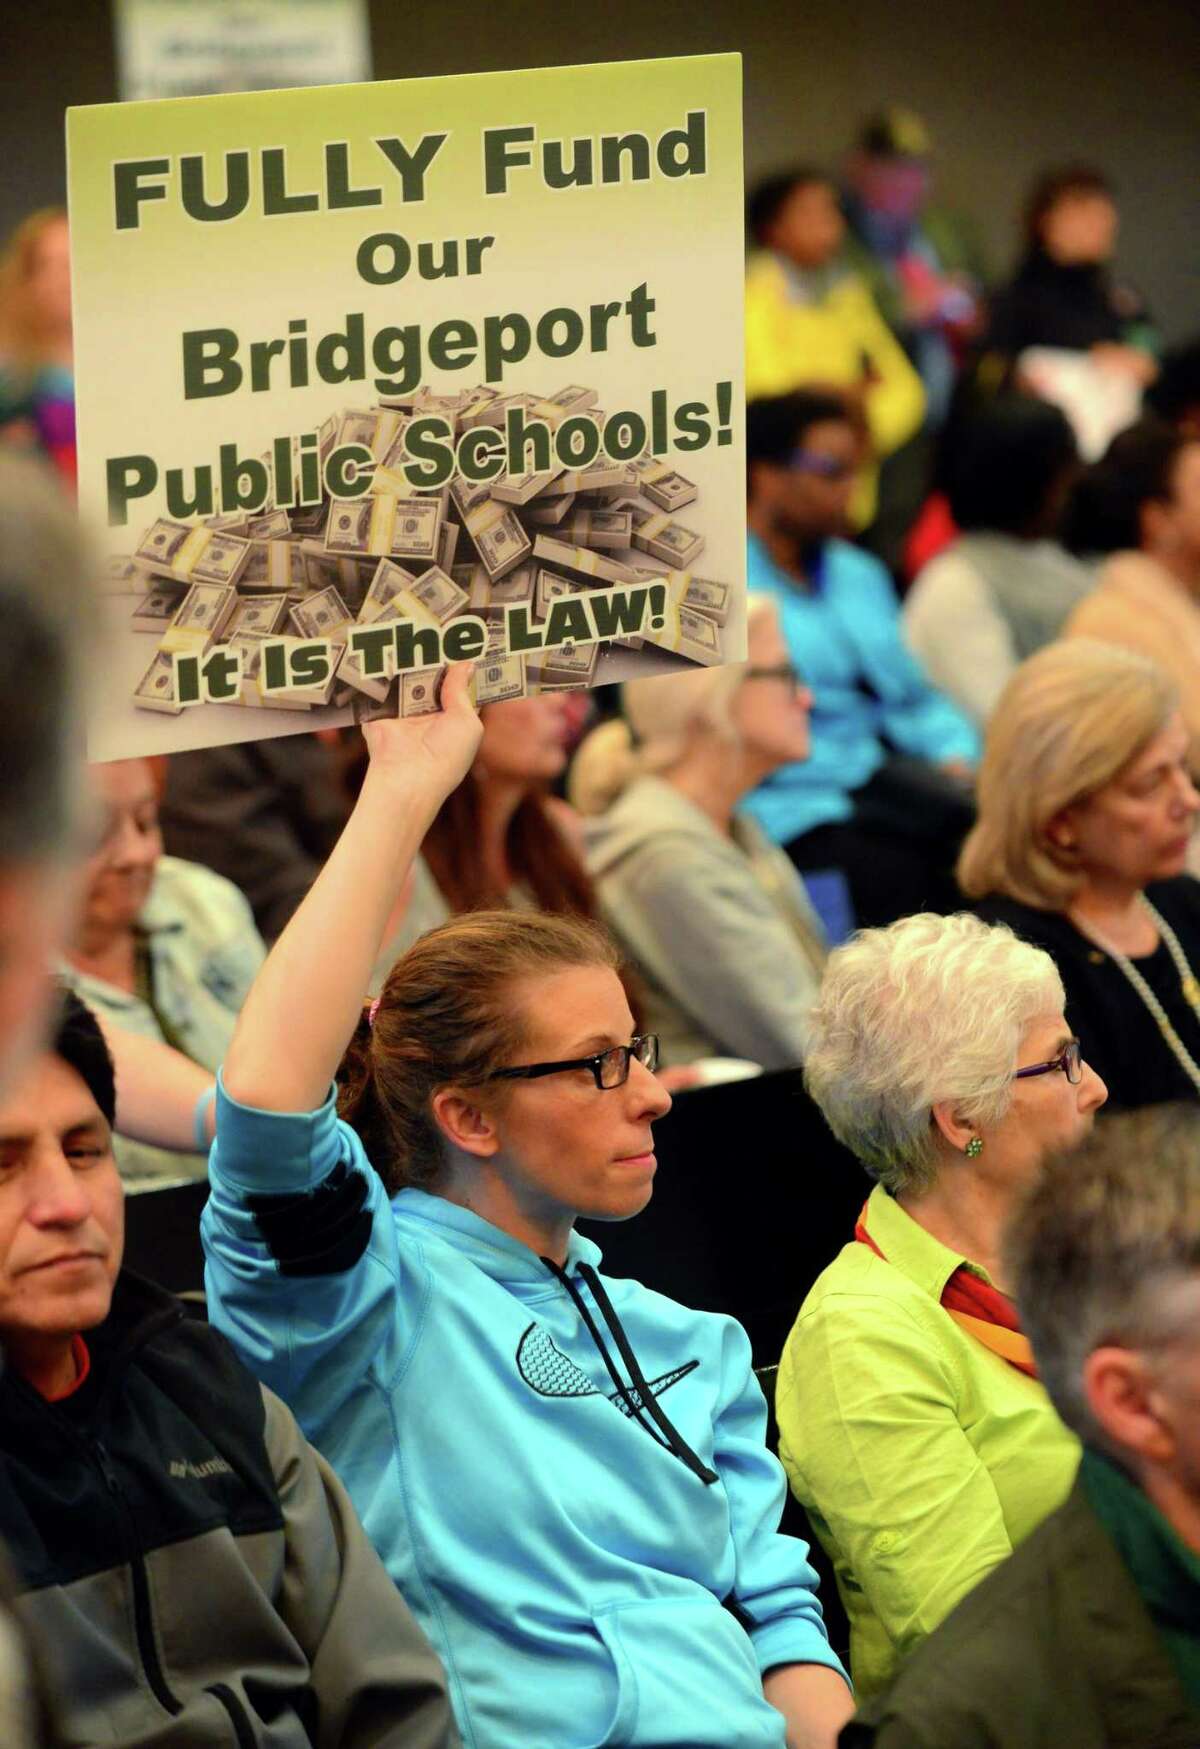 Parent Alissa Gerber along with hundreds of parents came out to tell the city council to fully fund the school board budget request during a committee meeting at City Hall's Council Chambers in Bridgeport, Conn., on Tuesday Apr. 25, 2017. The board wants $11.4 million over what it gets now.